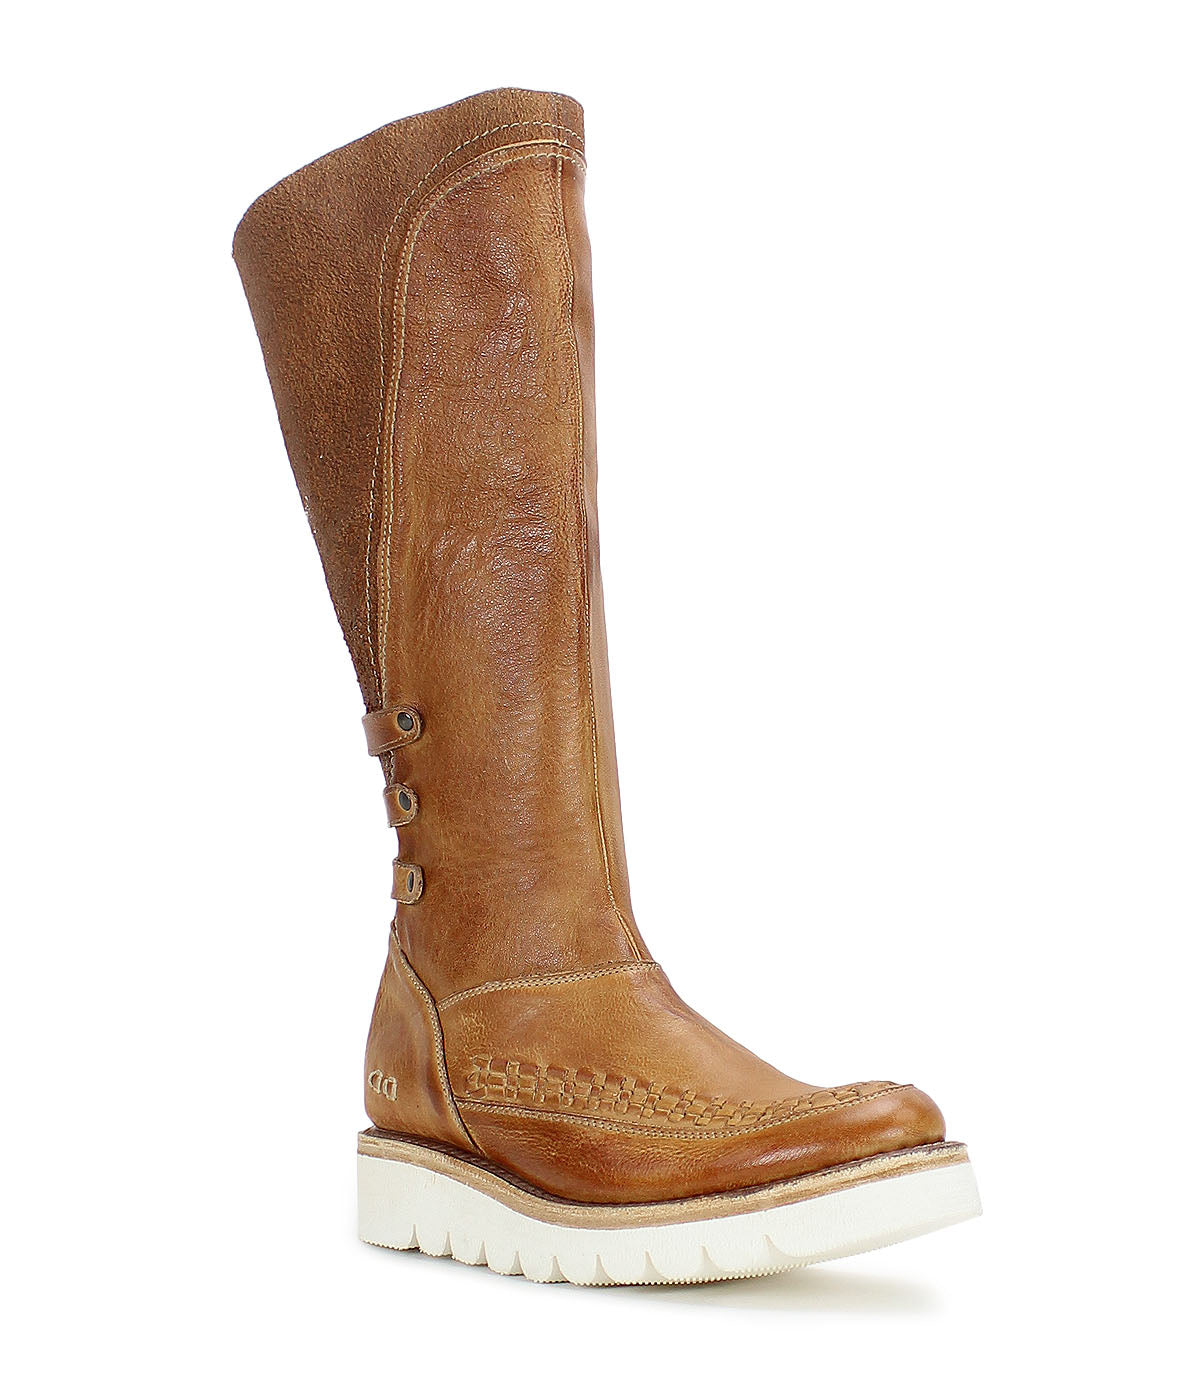 A women's Yoko leather boot from Bed Stu with a white sole.